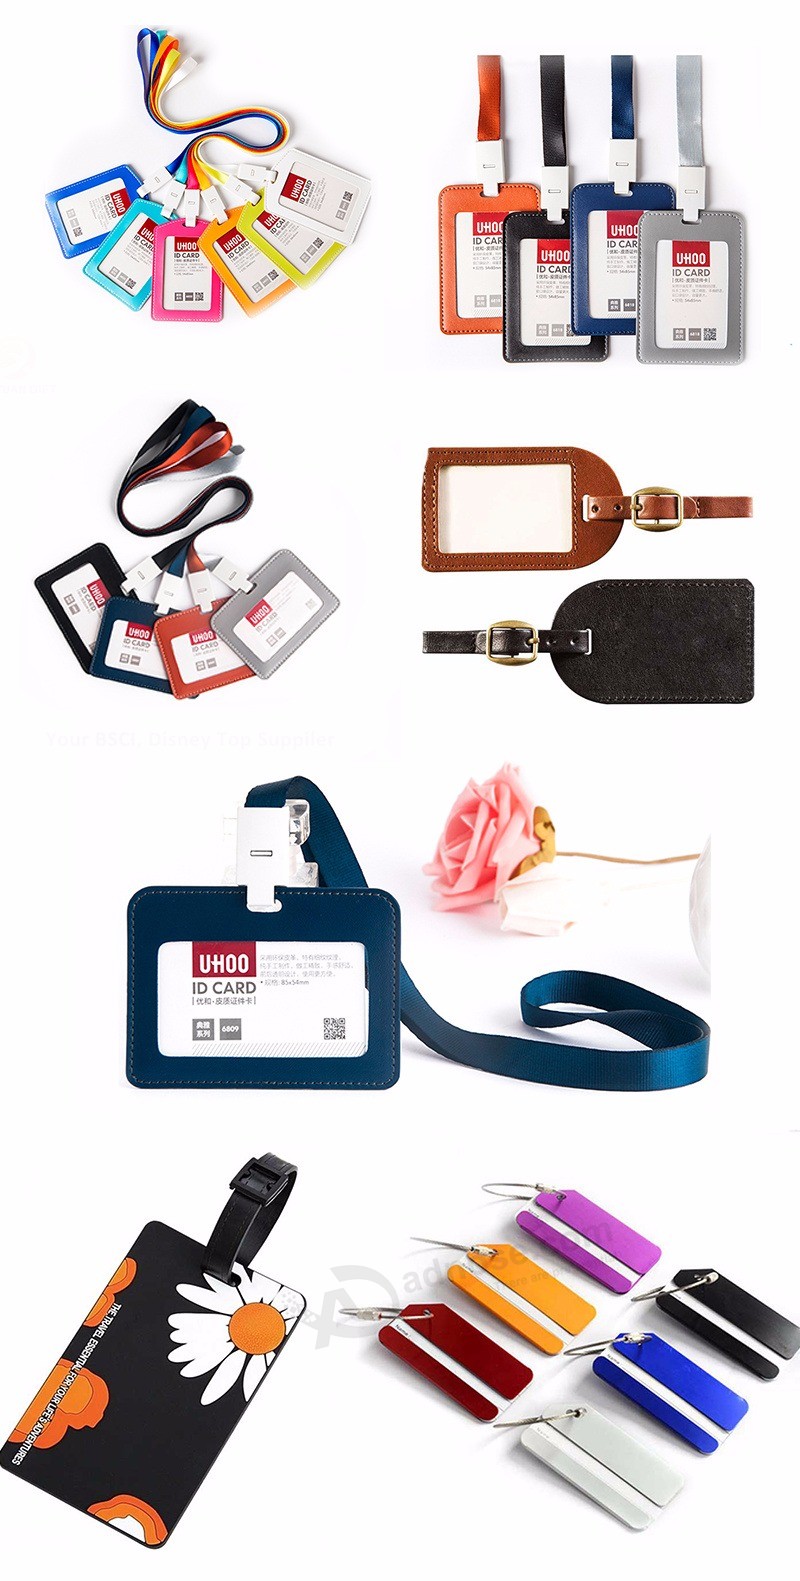 High quality Stock PU leather Luggage Tag